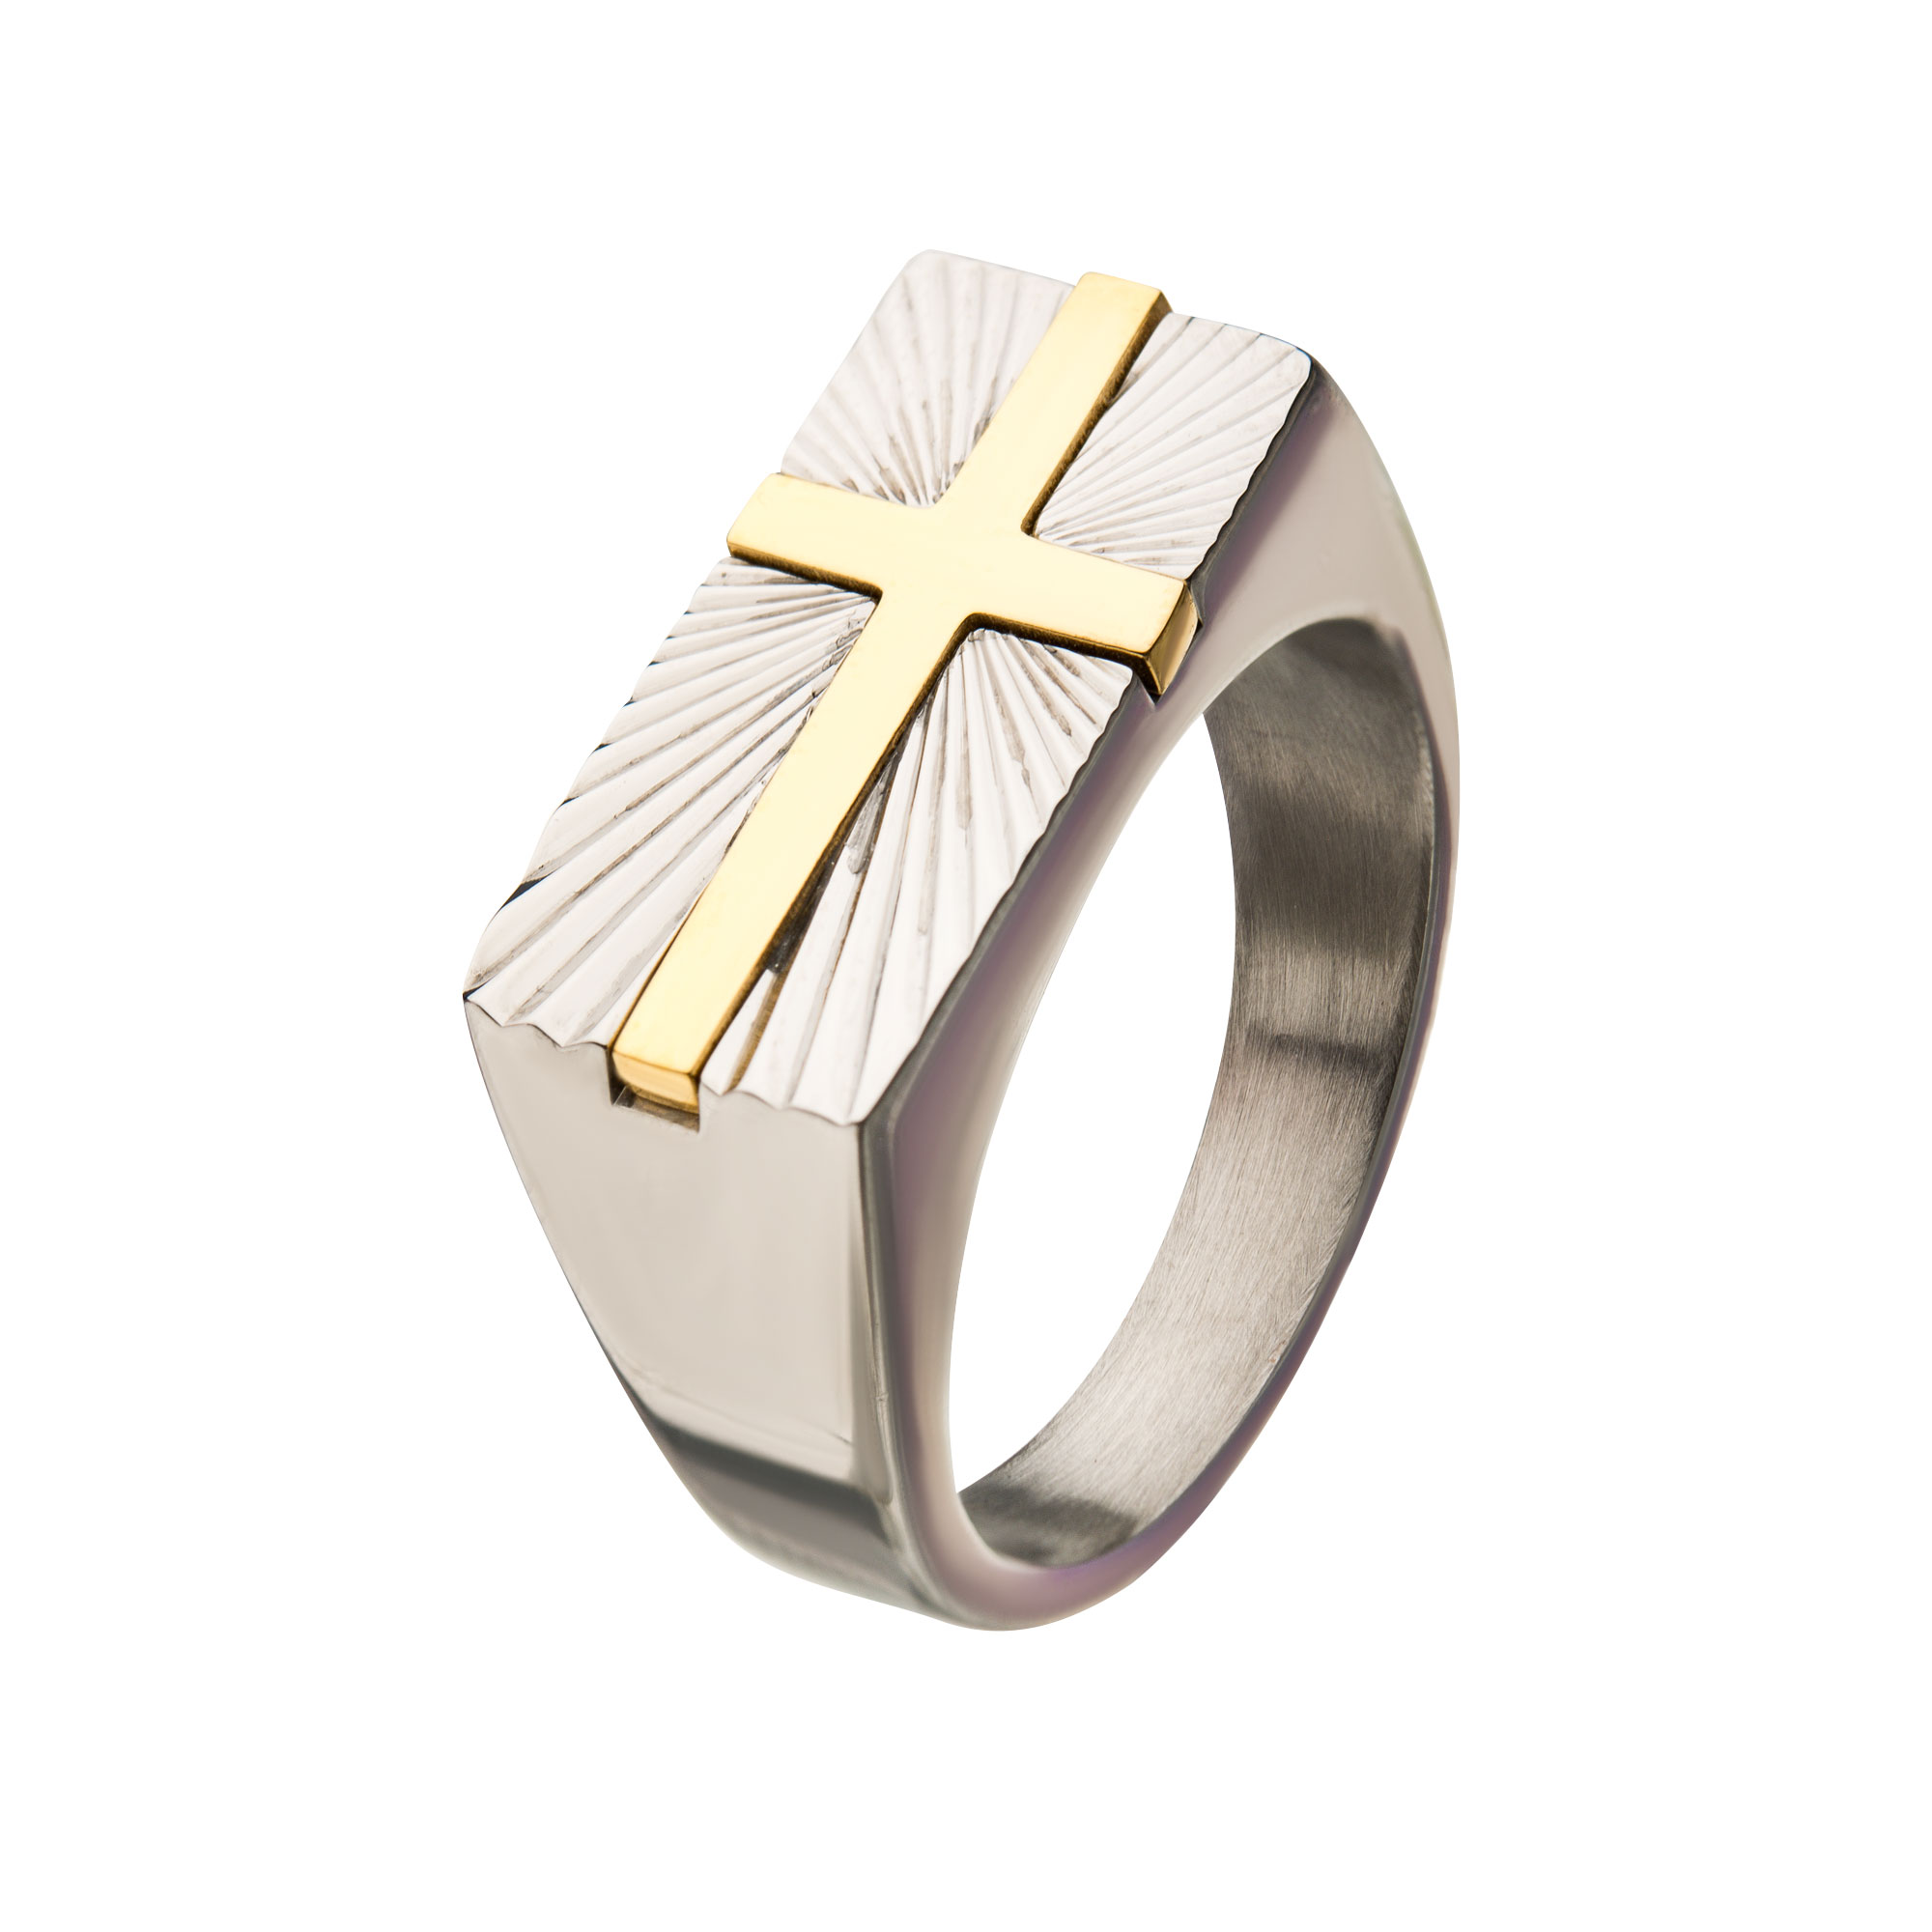 Stainless Steel with  Gold Plated Transfiguration Cross Ring Thurber's Fine Jewelry Wadsworth, OH